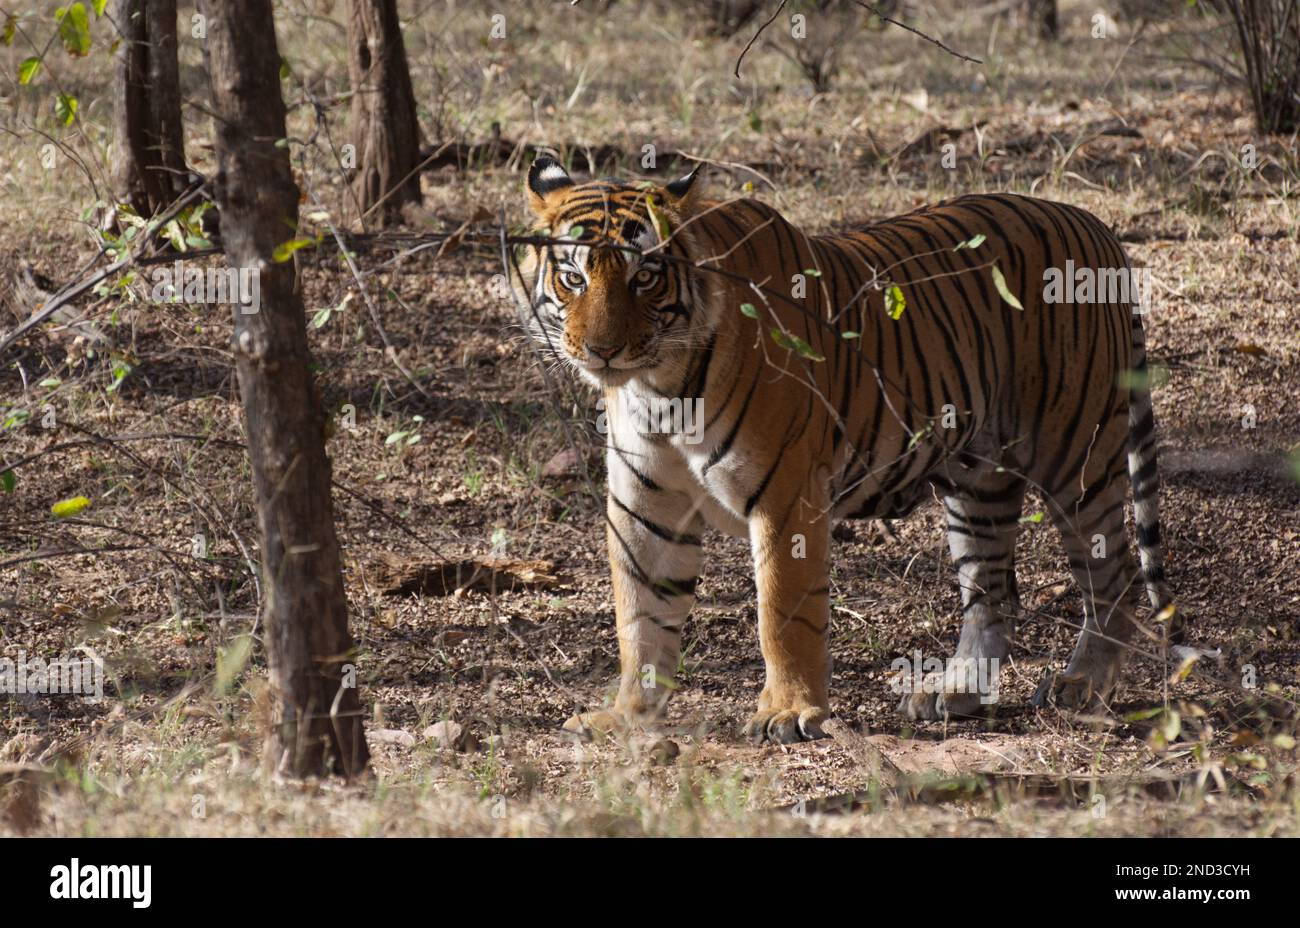 A male wild Royal Bengal Tiger standing amongst trees in the forest looking at the camera. The full animal is shown Stock Photo